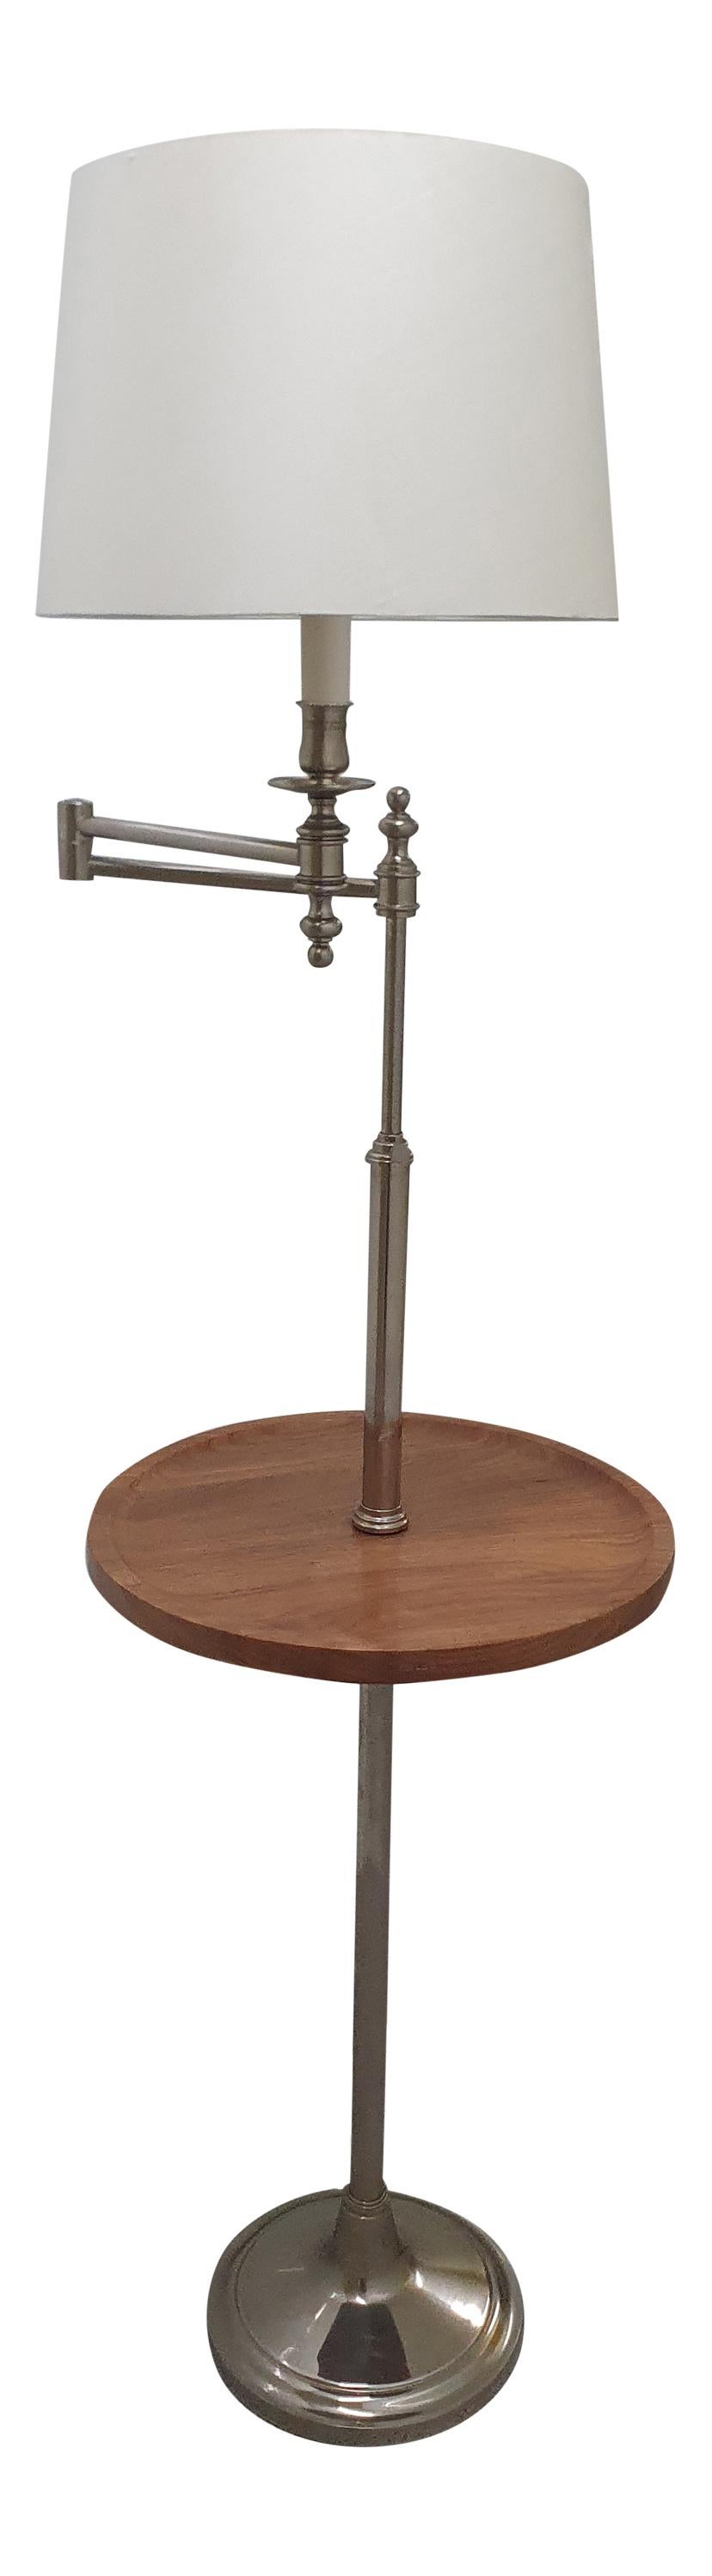 Hand-Carved 21st Century Swing Arm Floor Lamp with Floating American Walnut Table by Linley